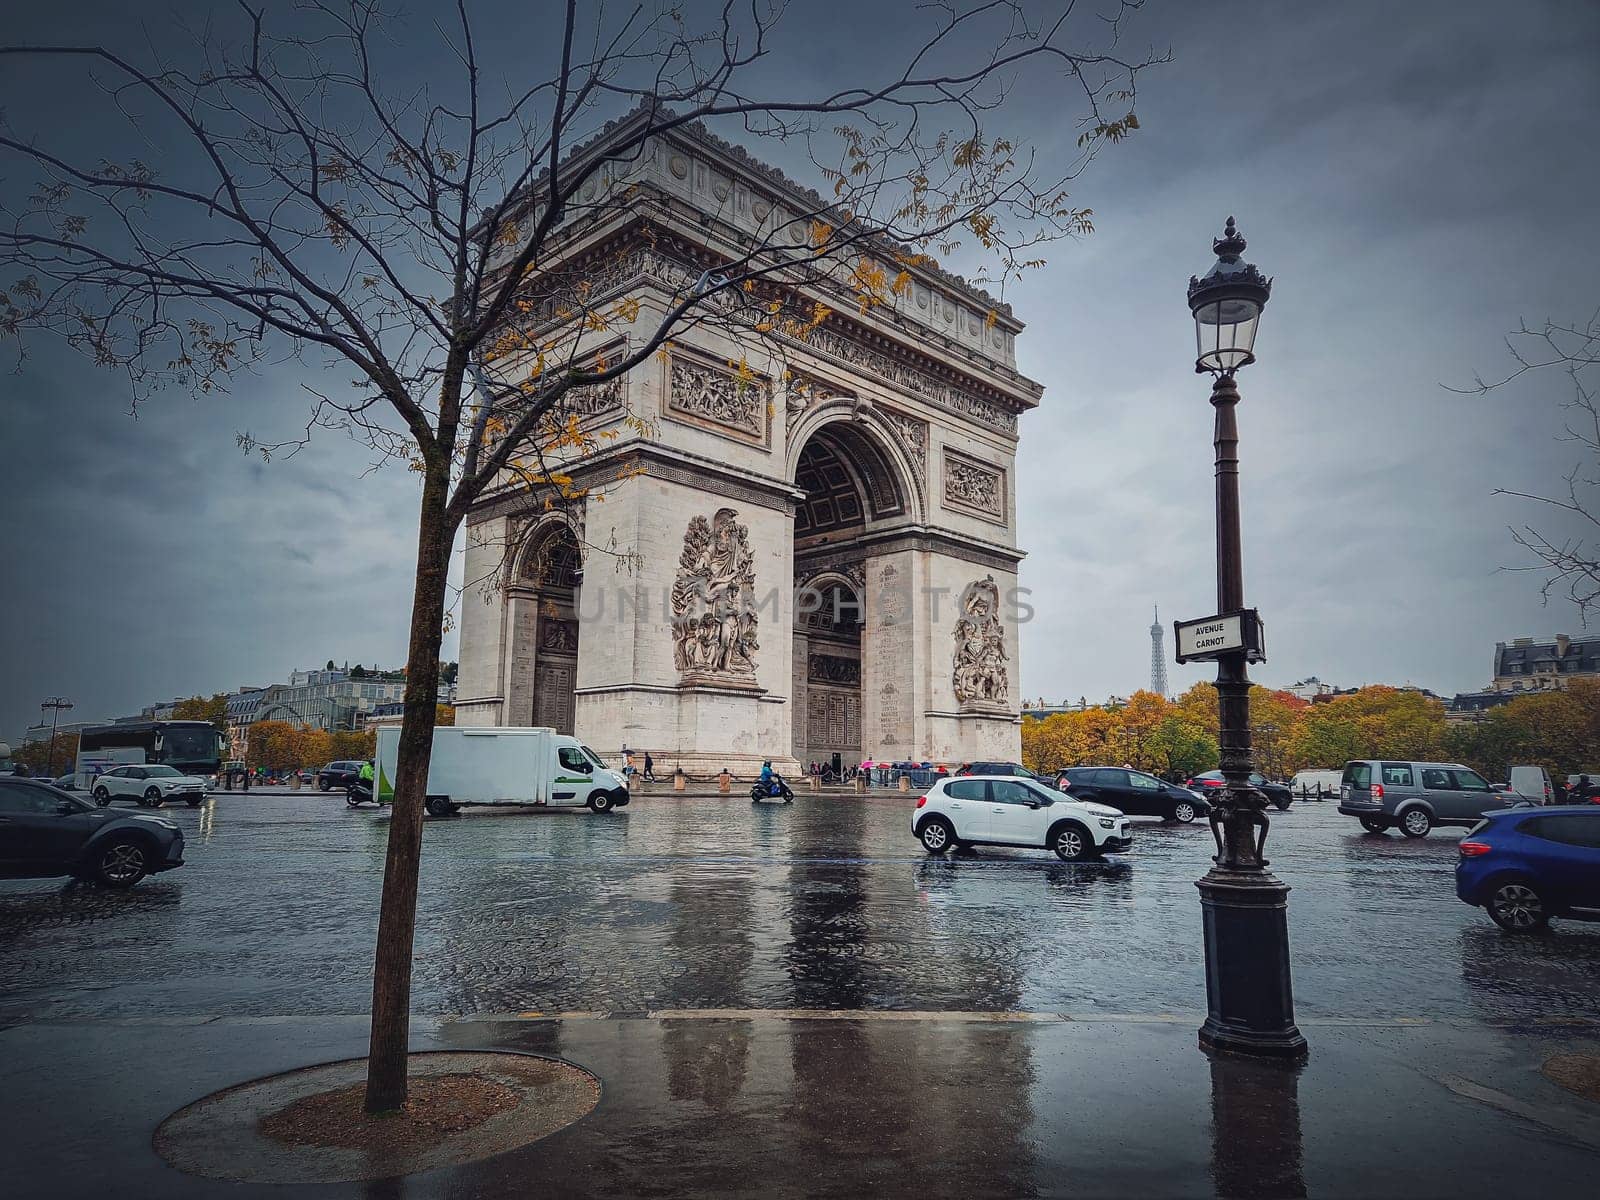 Triumphal Arch (Arc de triomphe) in Paris, France. Rainy autumn day with a romantic view to the historic landmark from avenue by psychoshadow